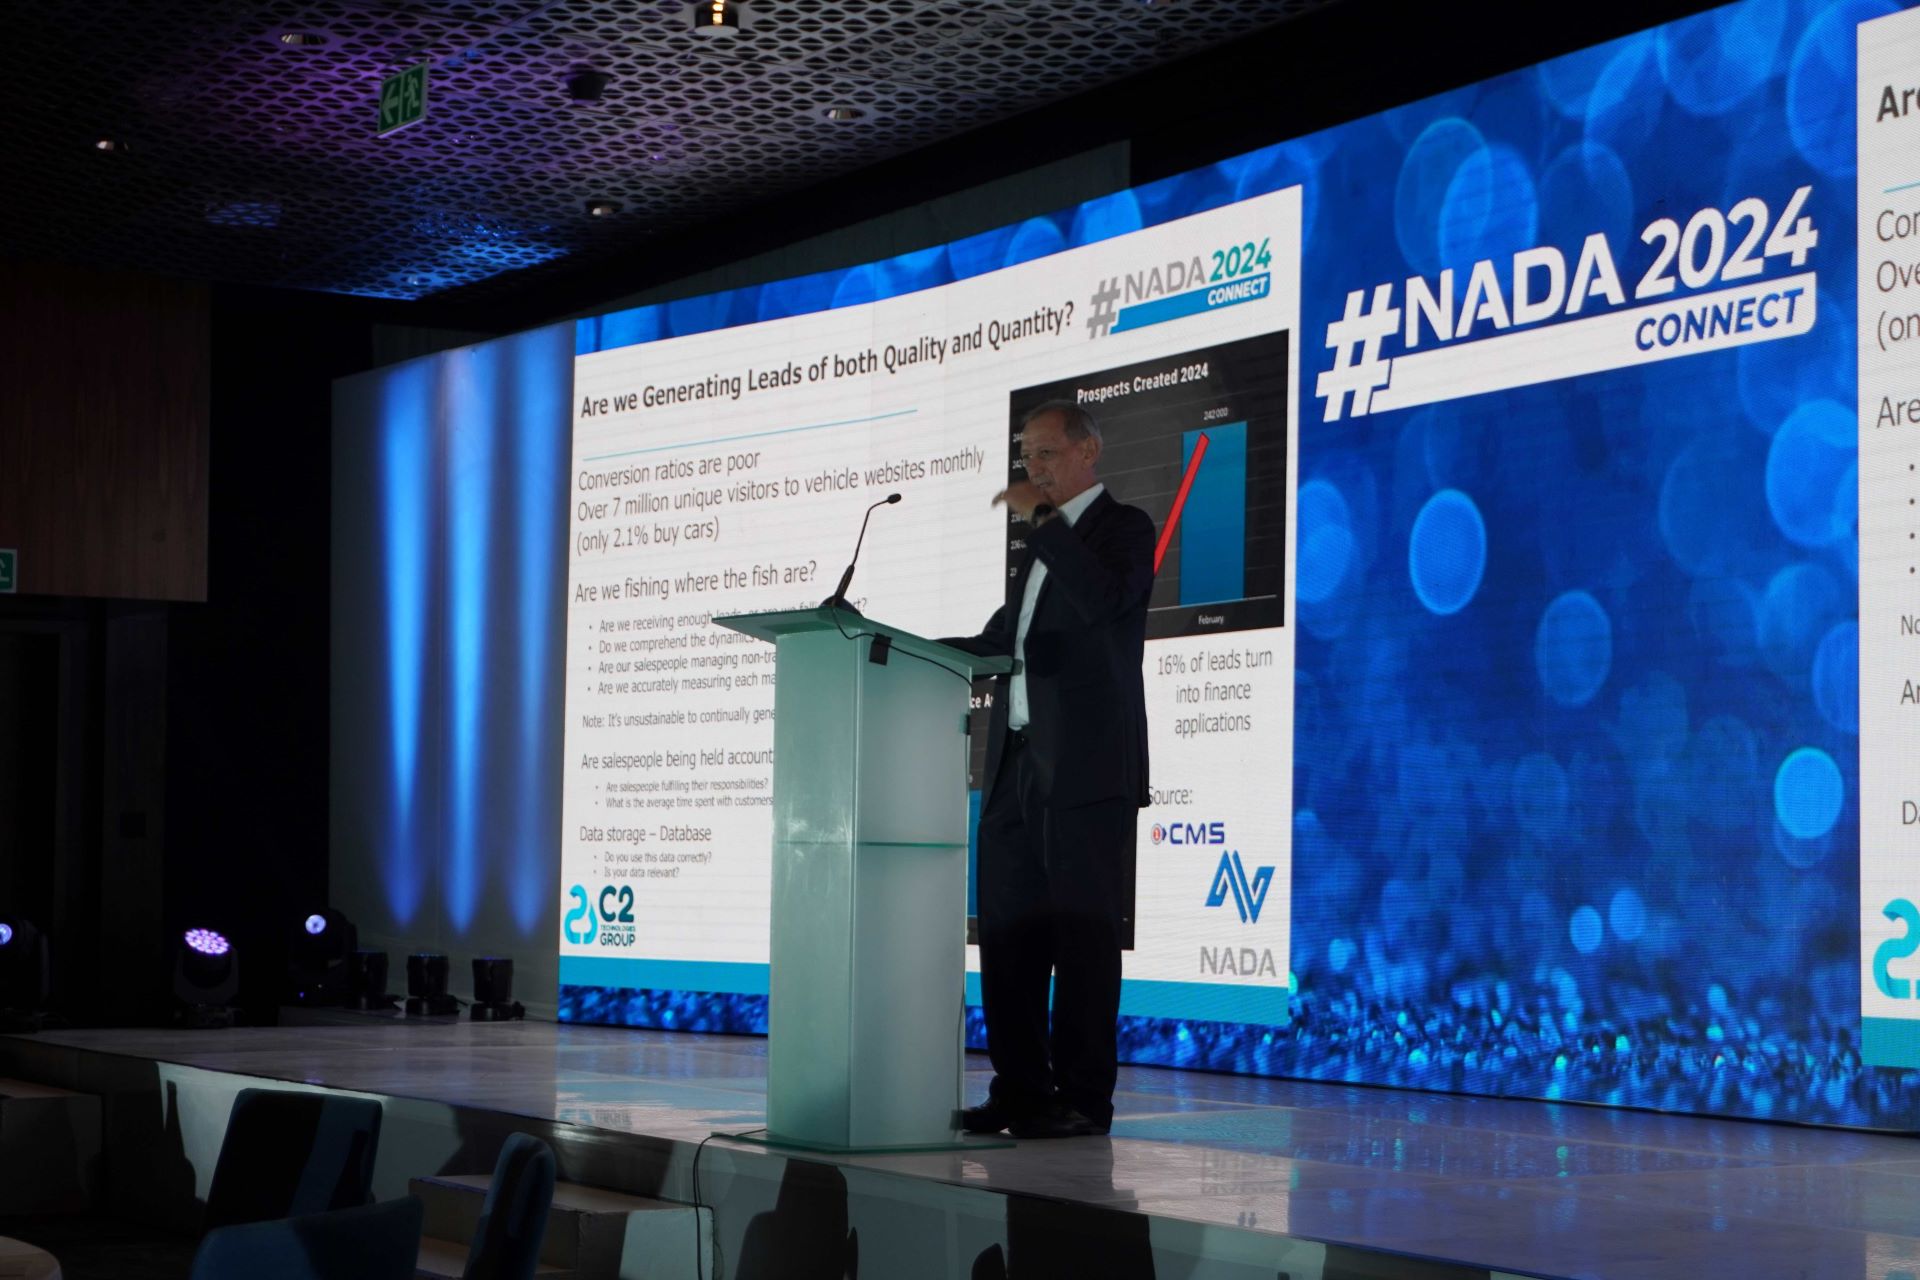 NADA Connect 2024 attendees treated to cream of local and international speakers